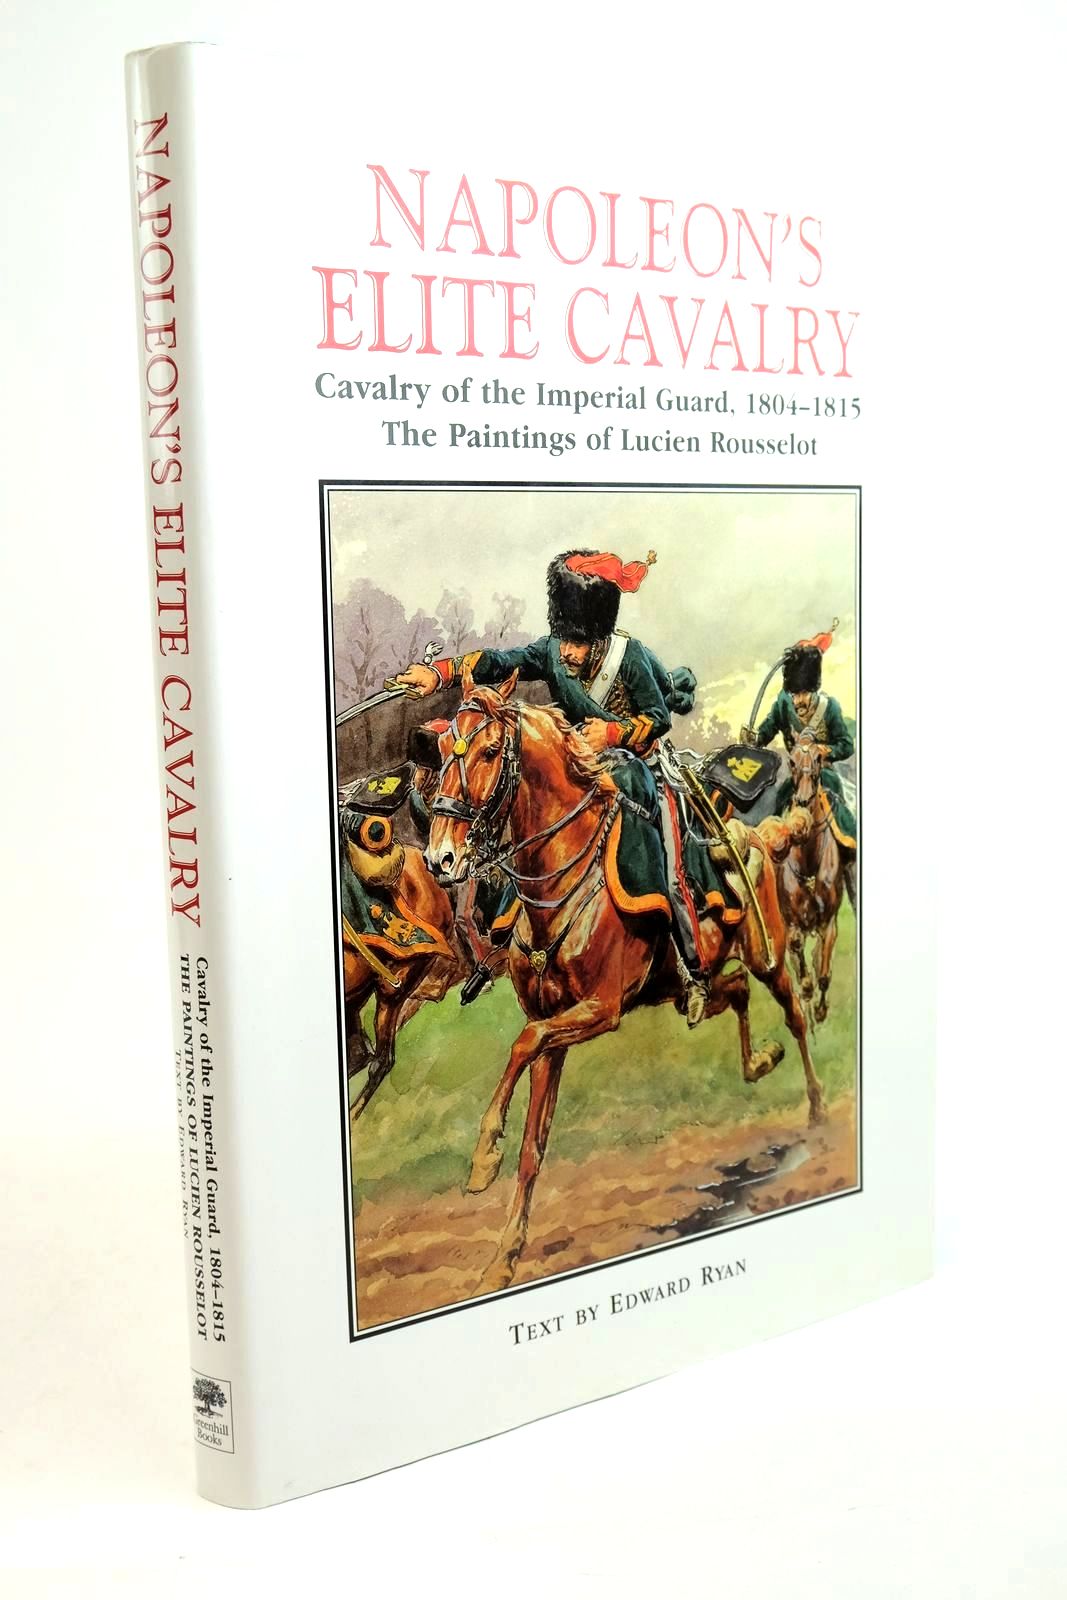 Photo of NAPOLEON'S ELITE CAVALRY written by Ryan, Edward illustrated by Rousselot, Lucien published by Greenhill Books, Stackpole Books (STOCK CODE: 1321449)  for sale by Stella & Rose's Books